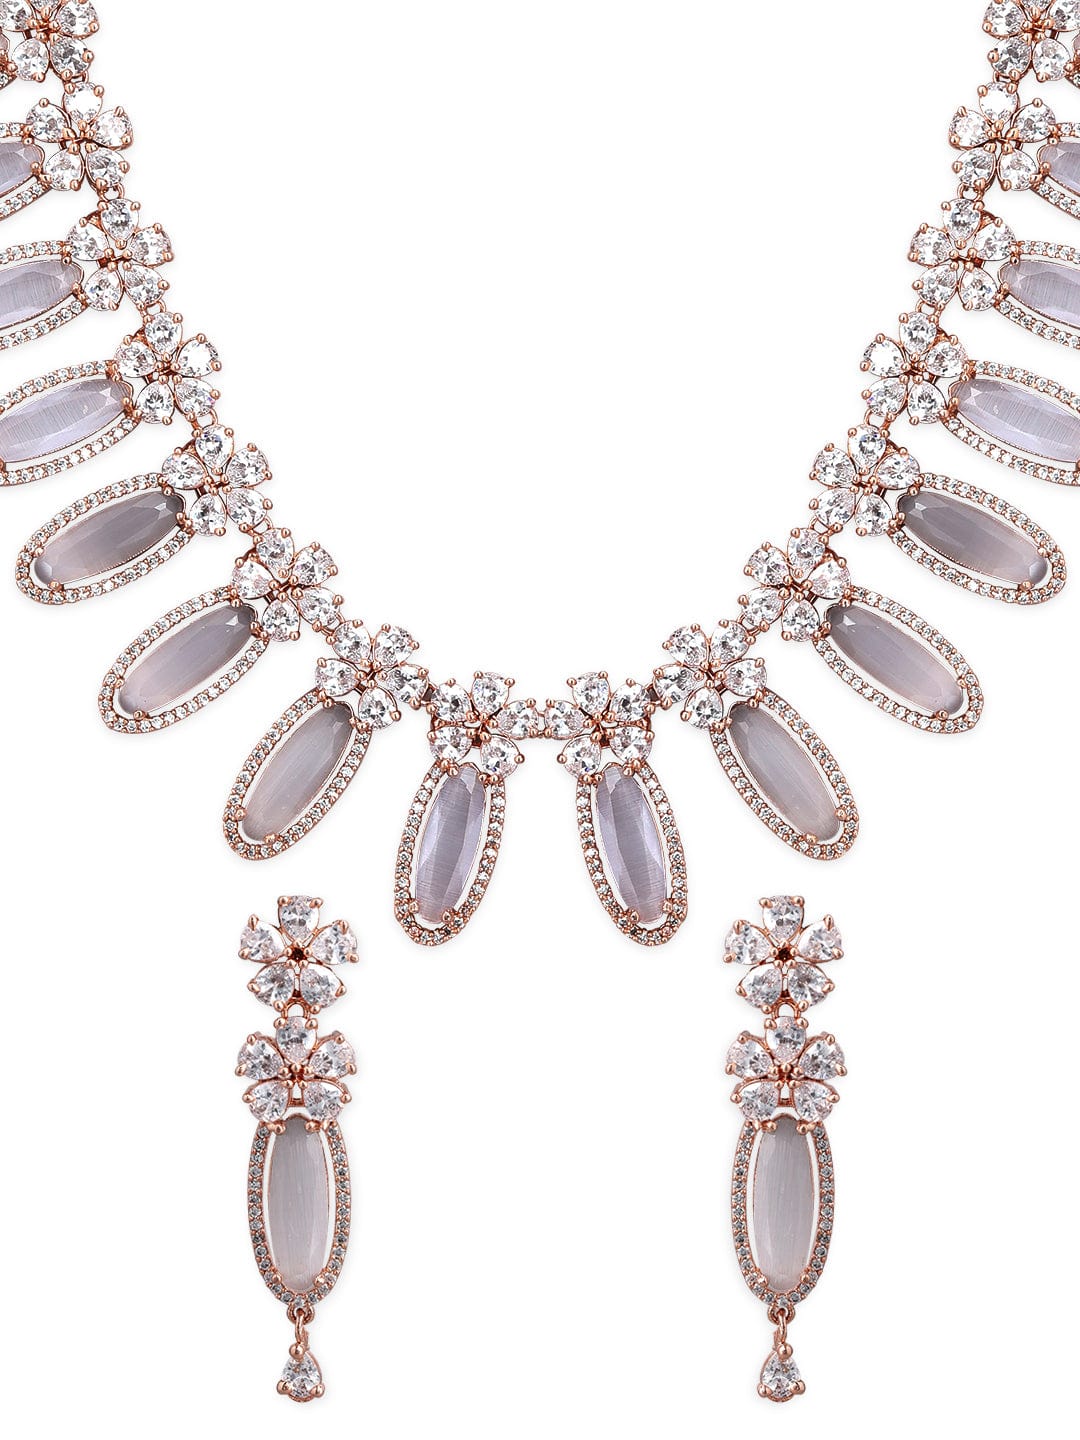 Rubans Rose Gold Plated White Beads American Diamond Necklace Set. Necklace Set